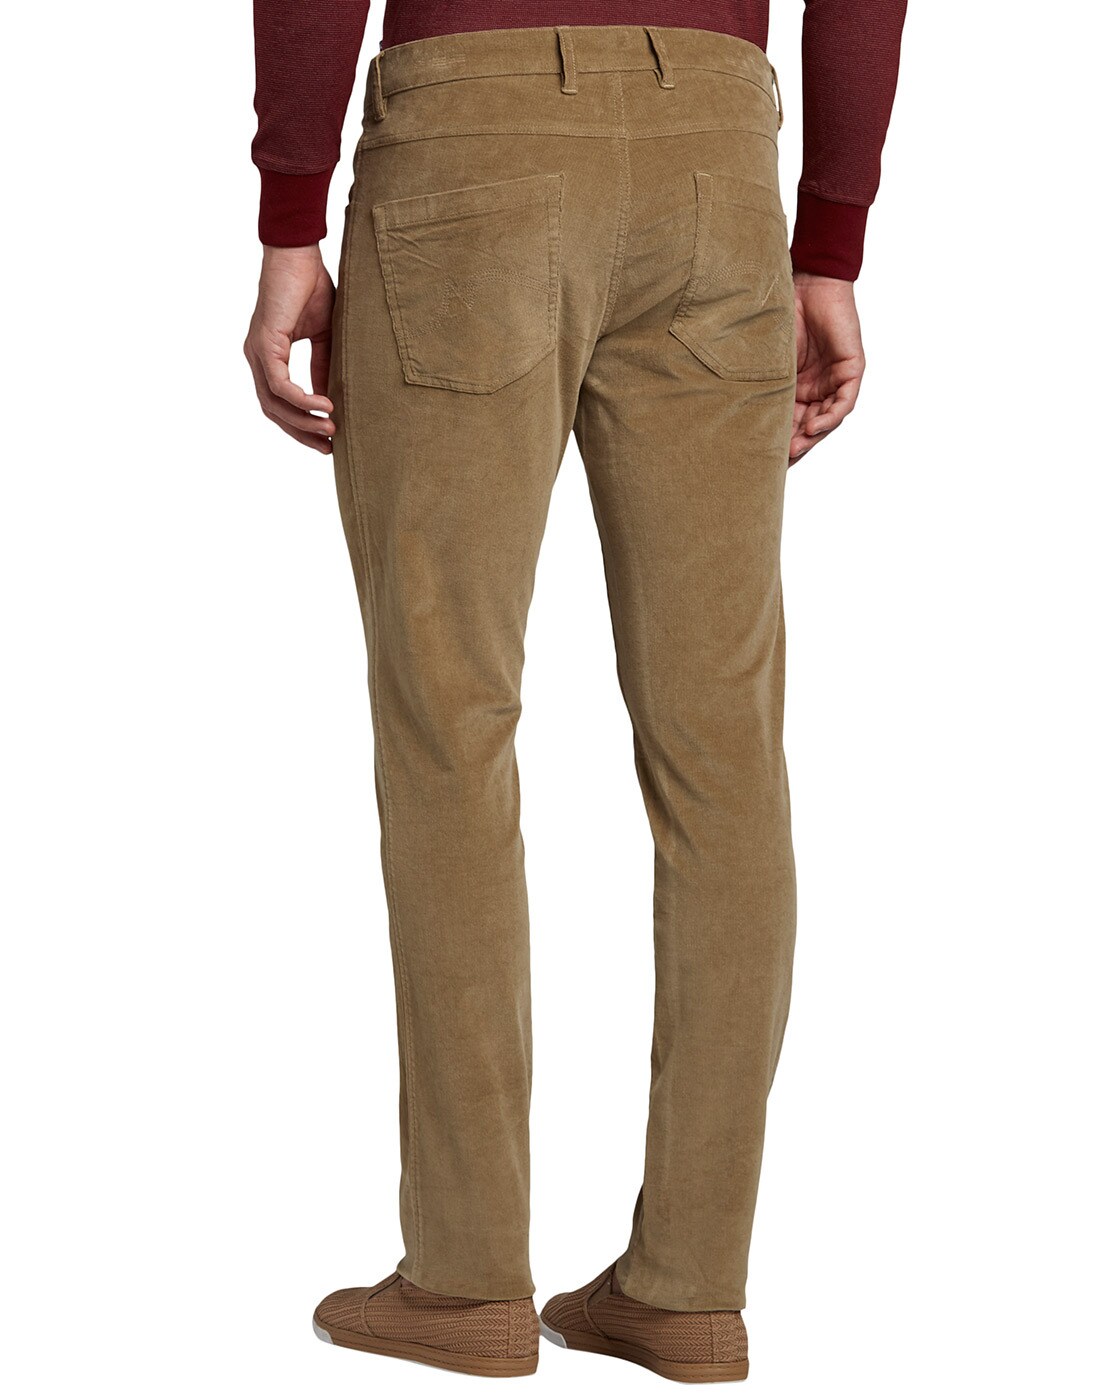 Buy Parx Tapered Fit Solid Grey Trouser online